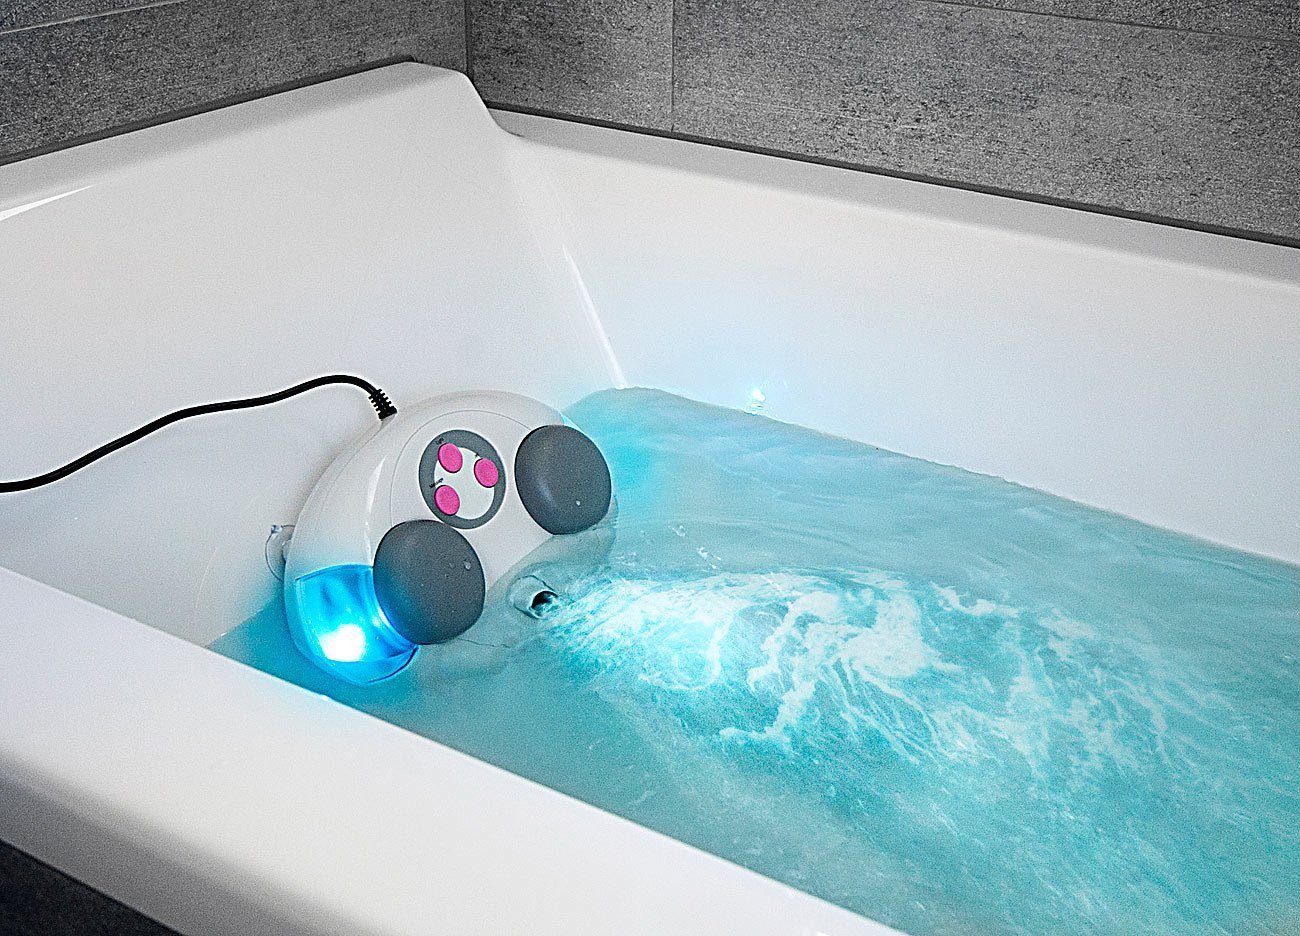 11.MONSTERZEUG Massage Device For The Bath, 3in1 Wellness €99.95, 